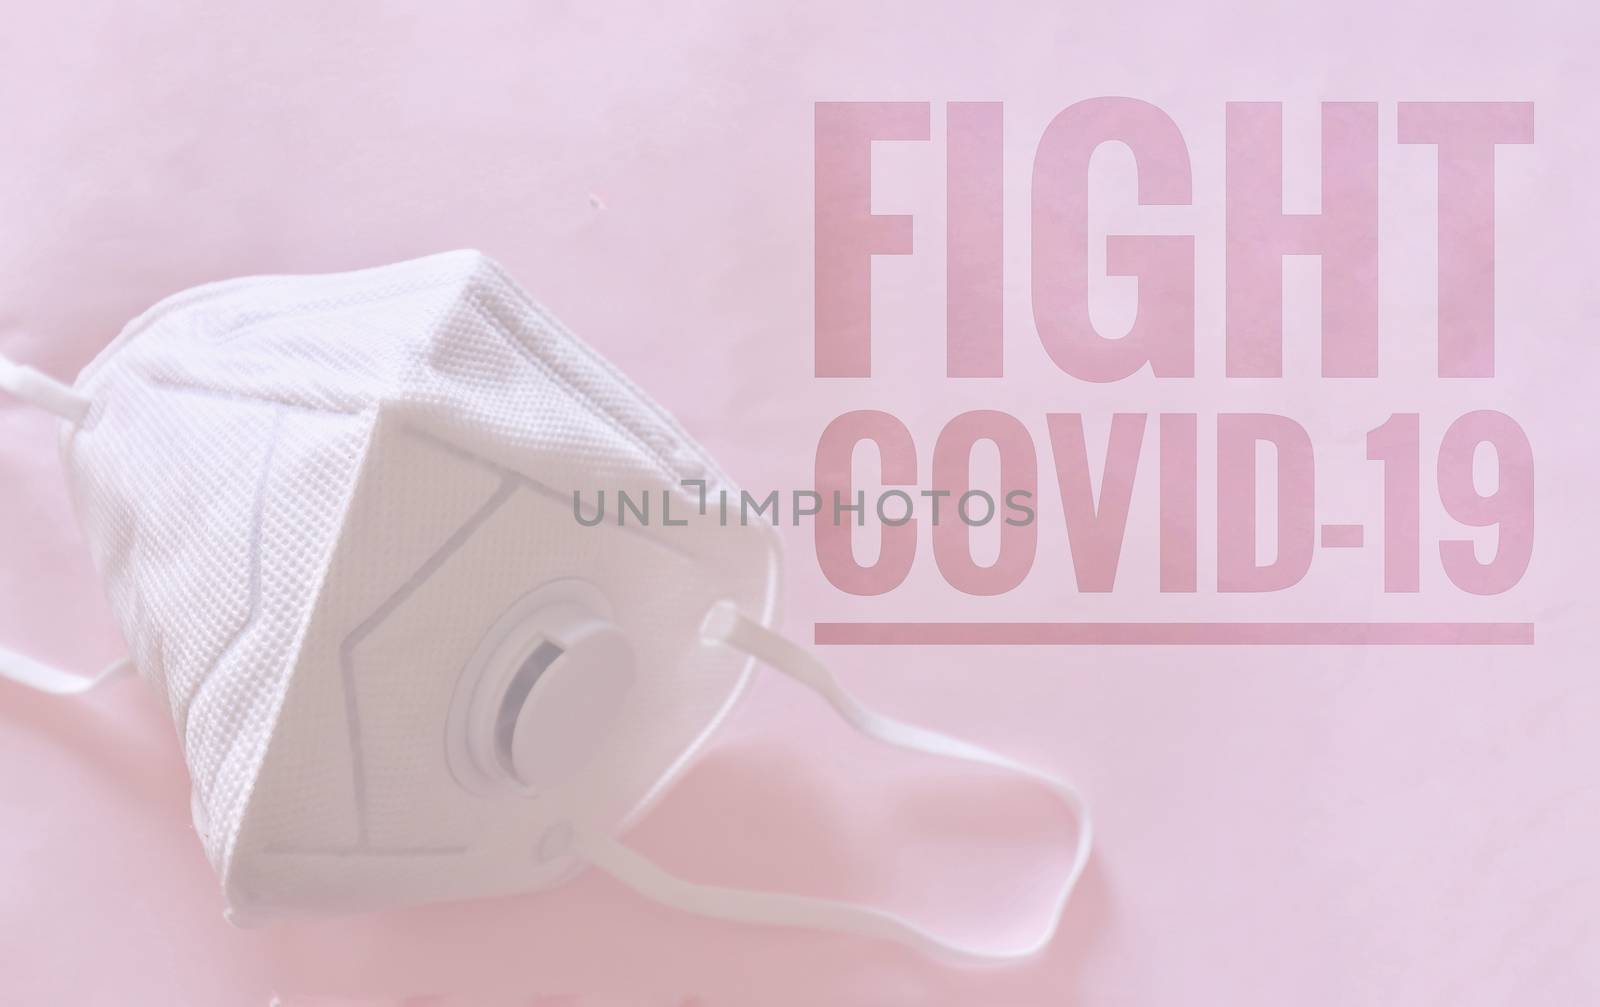 N95 mask against a pink background with the words Fight Covid-19 written on it to raise awareness in fighting the coronavirus global pandemic crisis